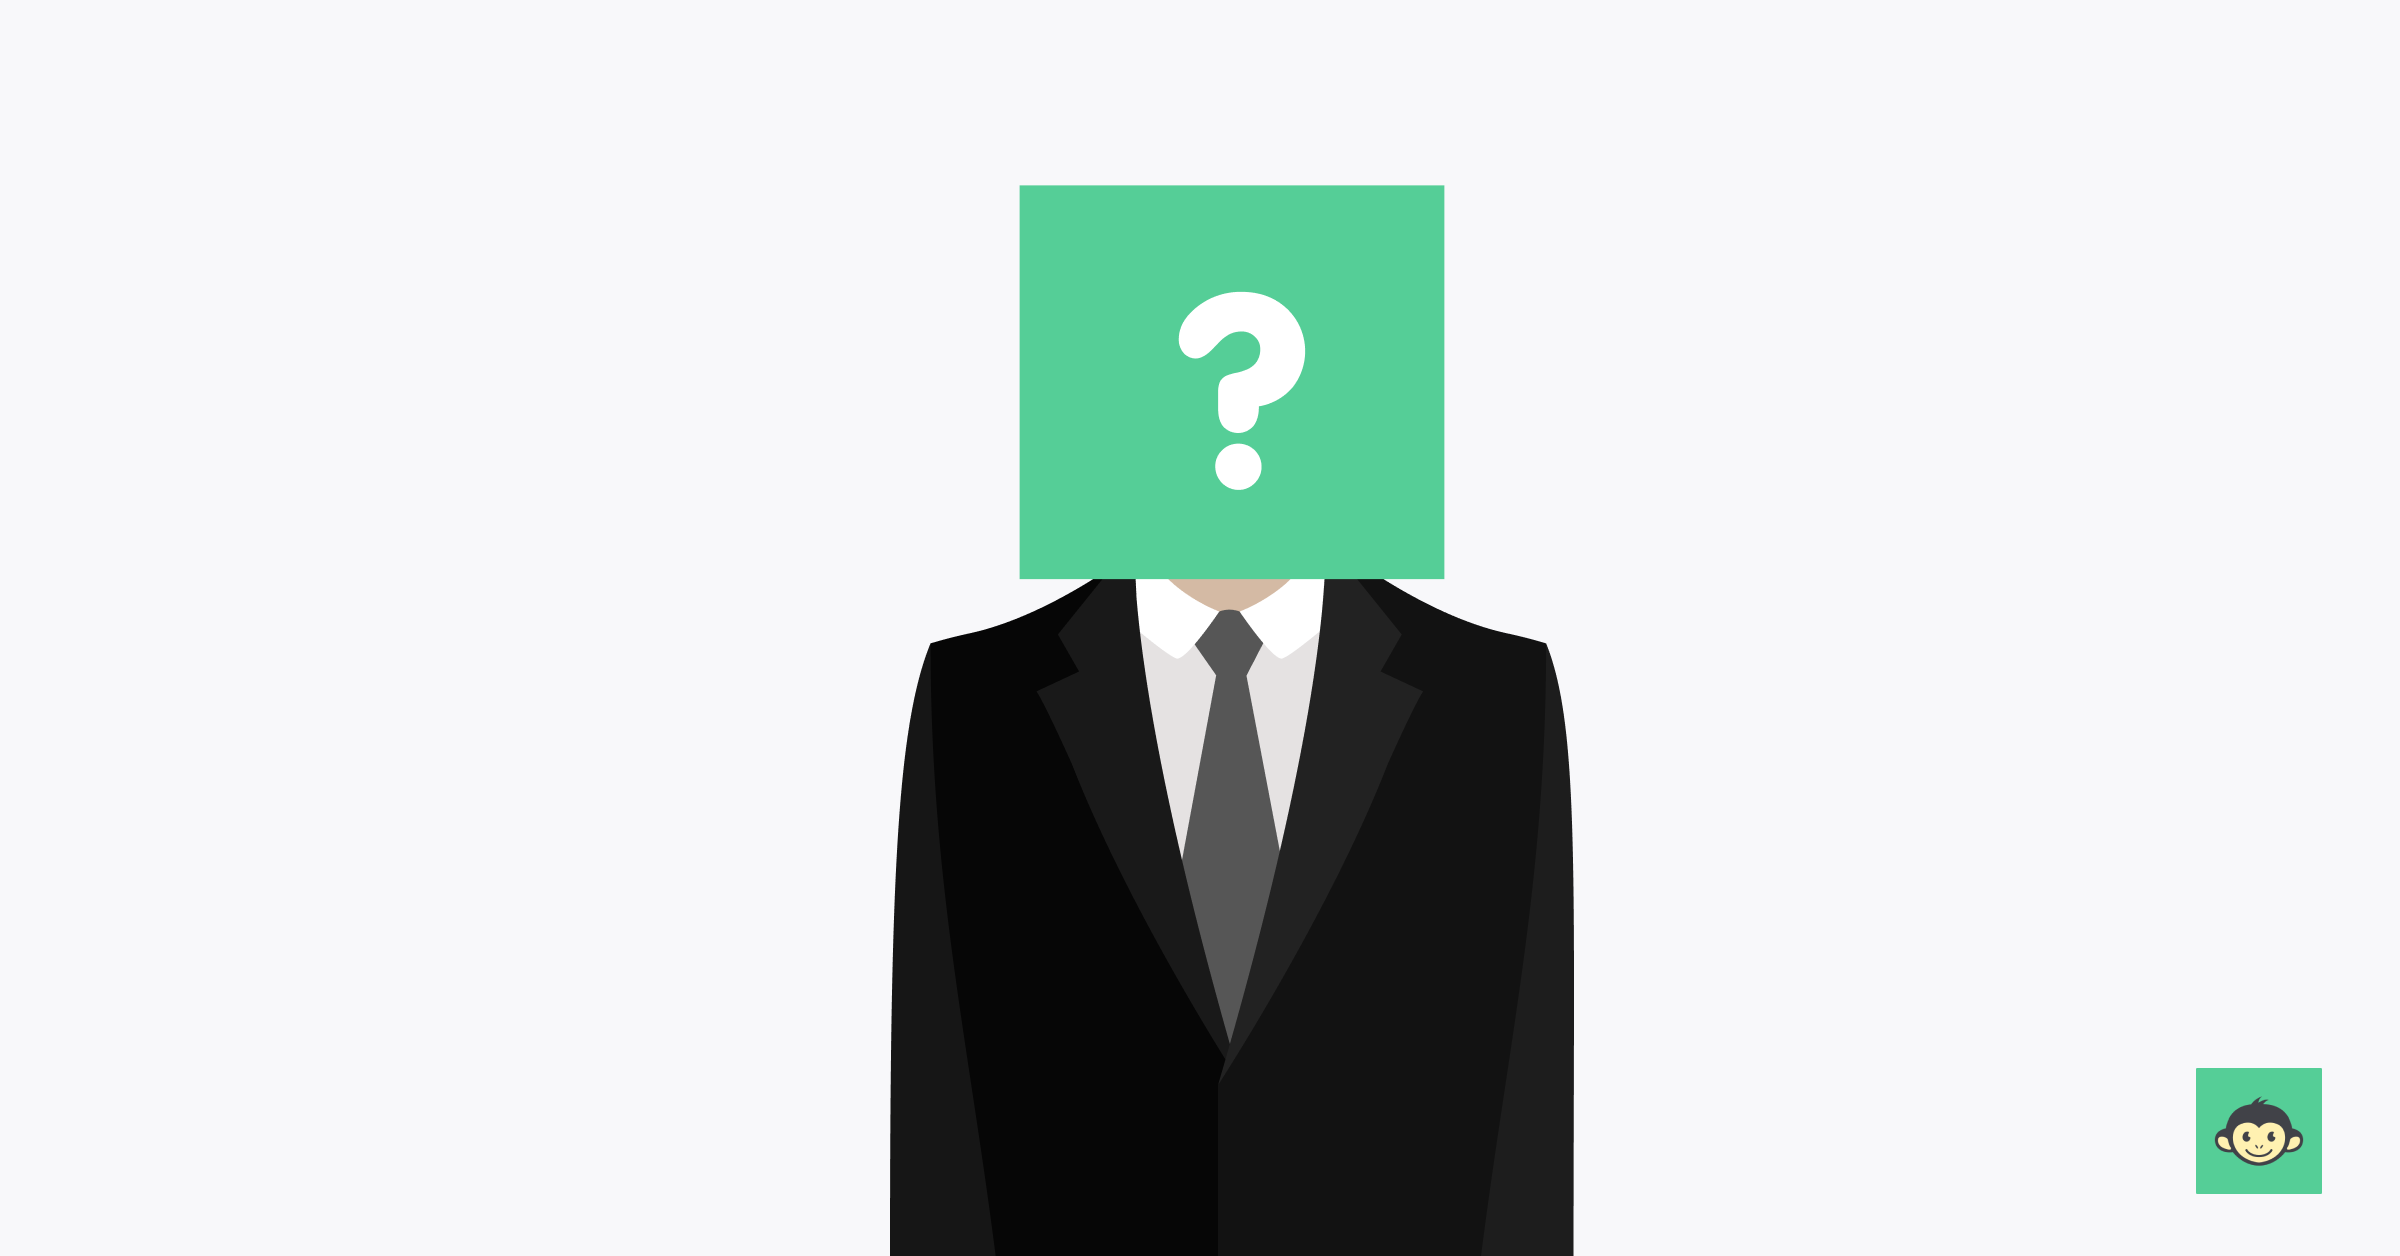 Employer is standing but with a question mark instead of face